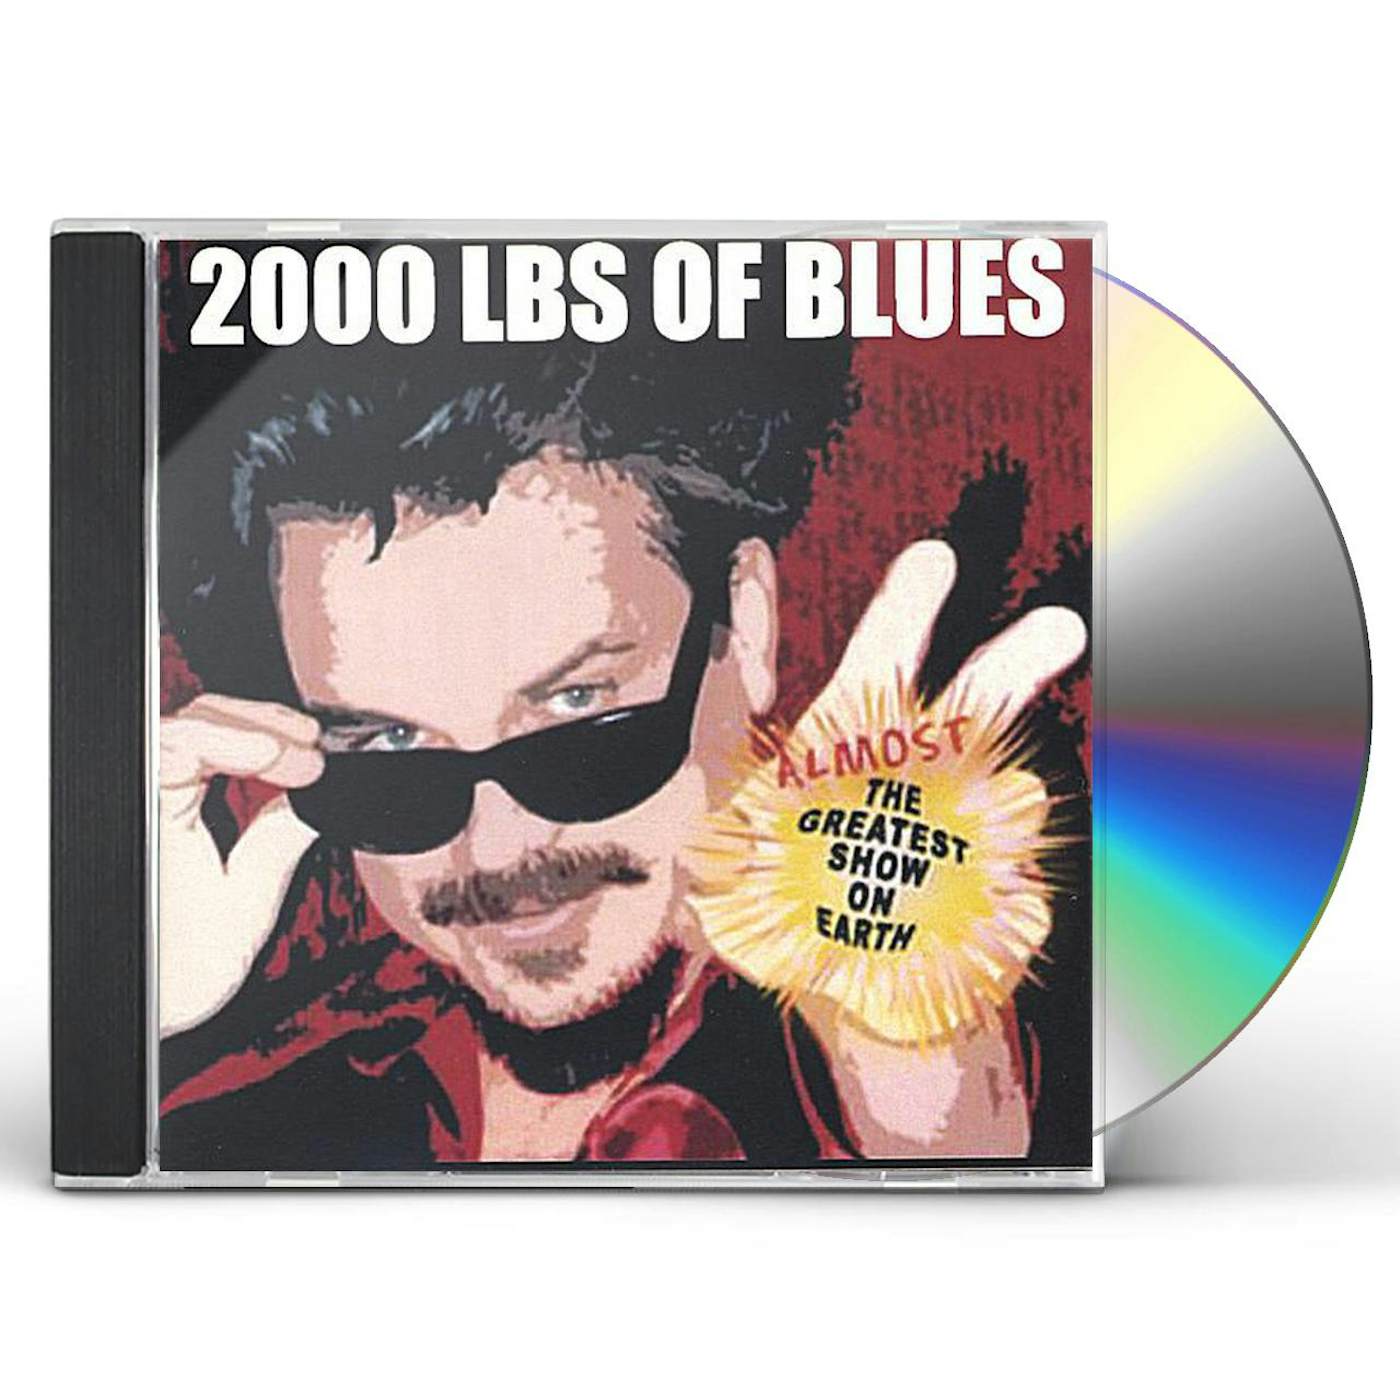 2000 Lbs of Blues ALMOST THE GREATEST SHOW ON EARTH CD